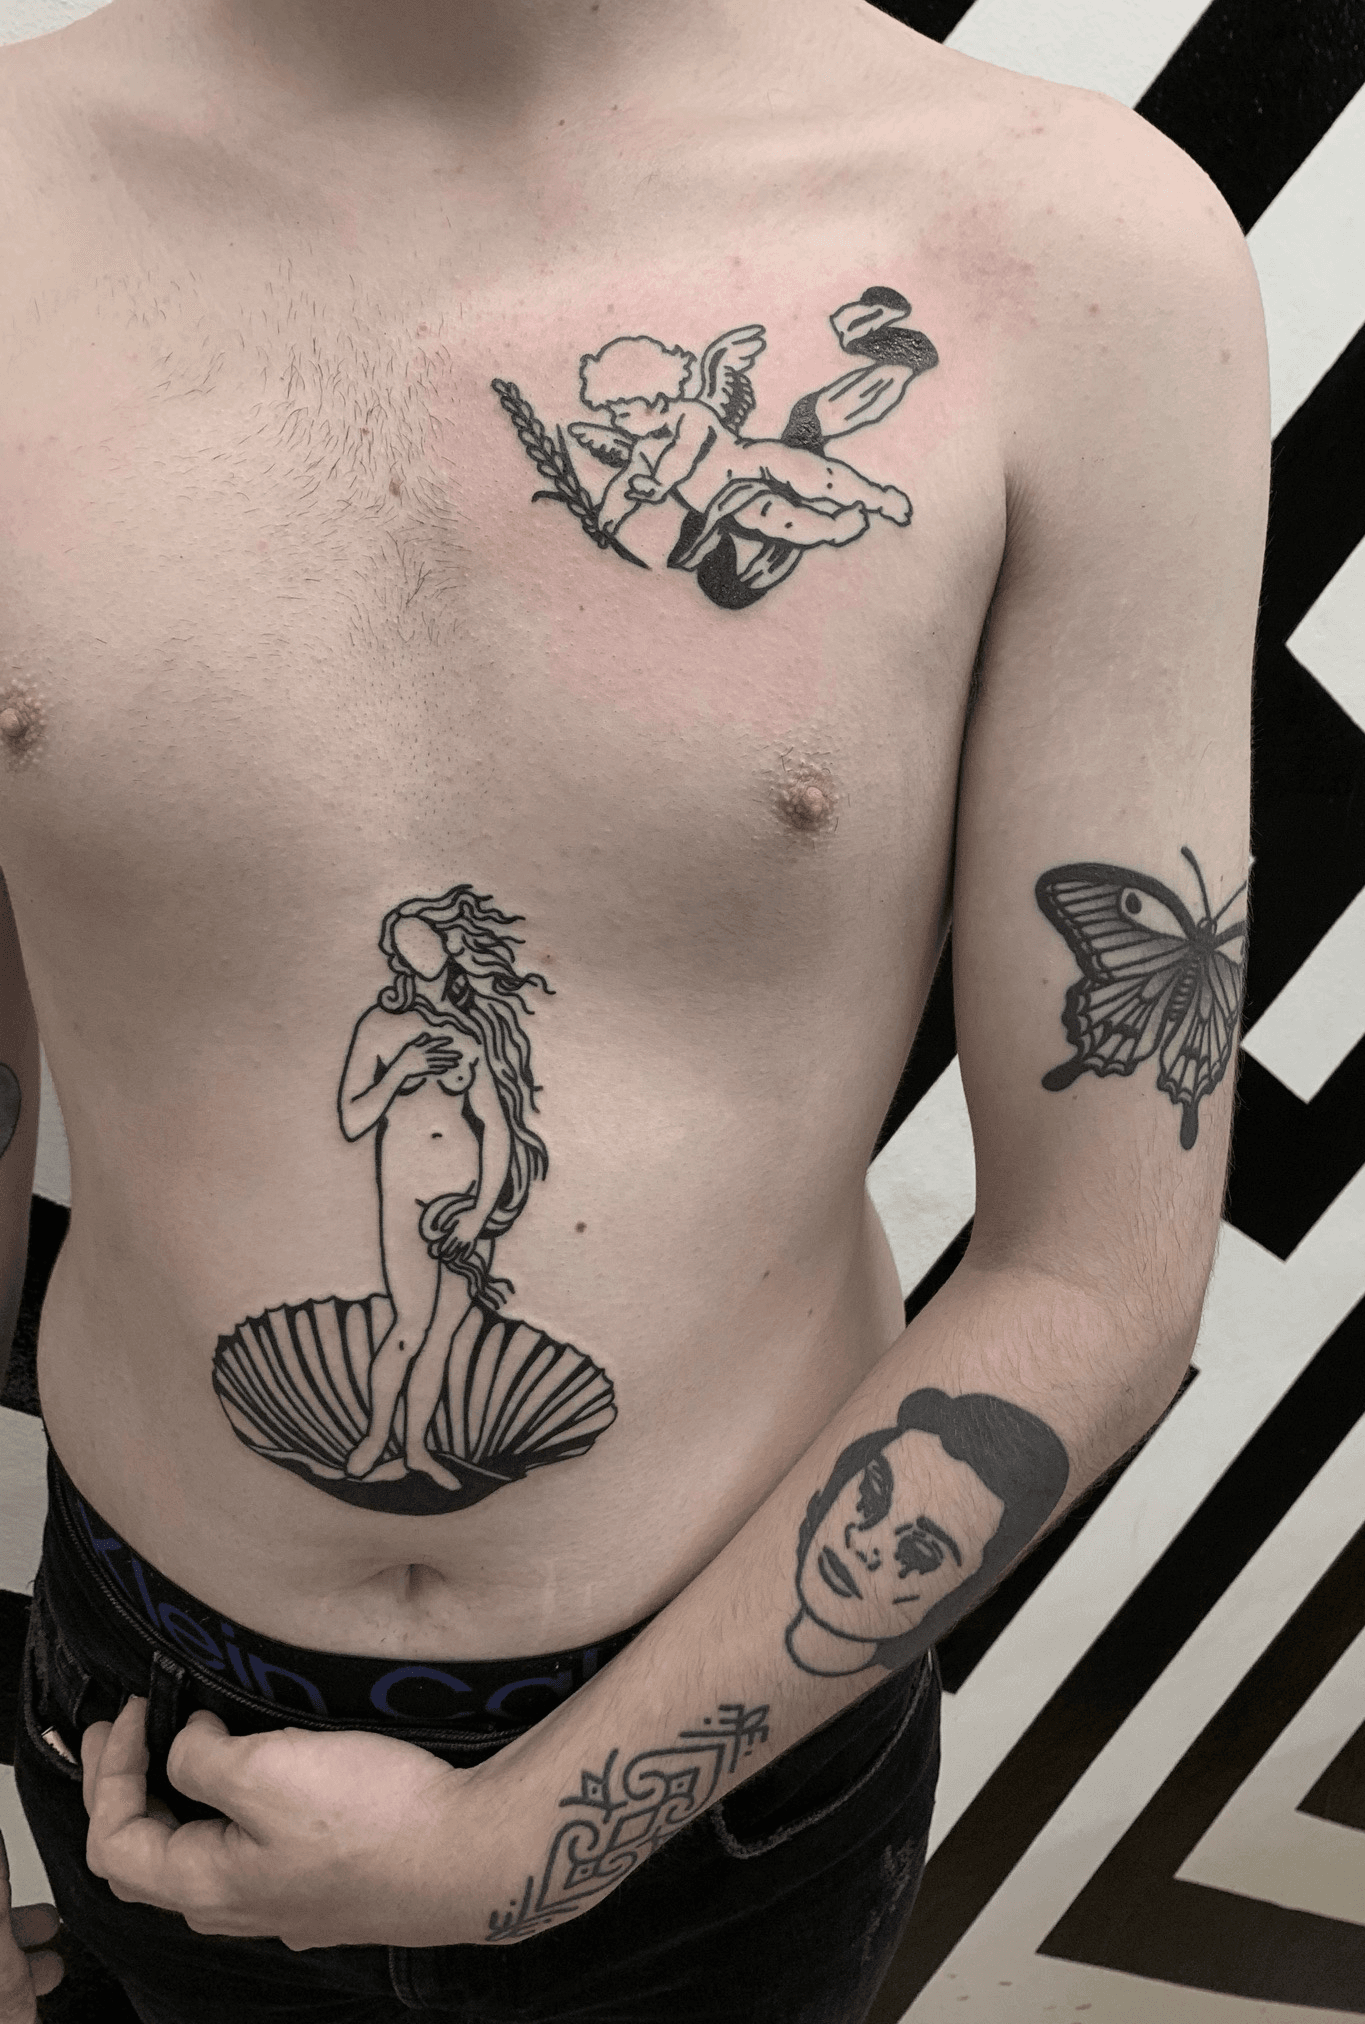 Birth of Venus tattoo made by Zach  The Bell Rose Tattoo  Facebook